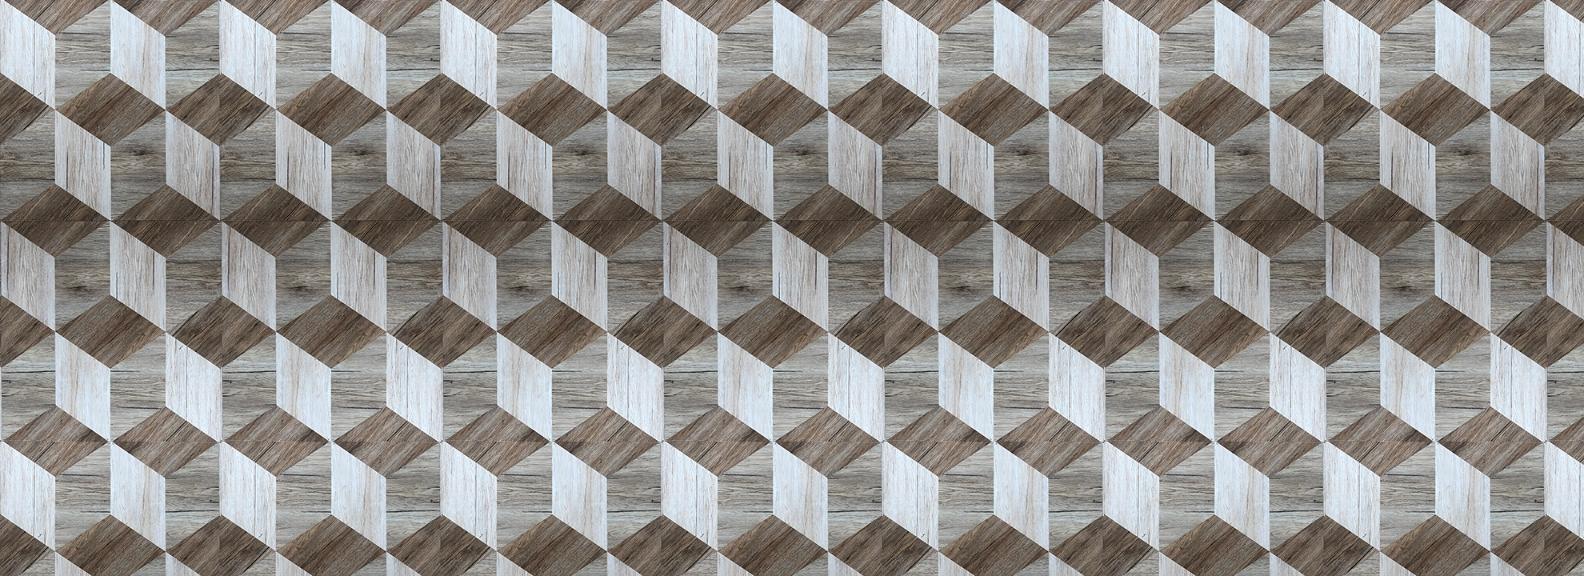 Divider Tiles – Sequence 2